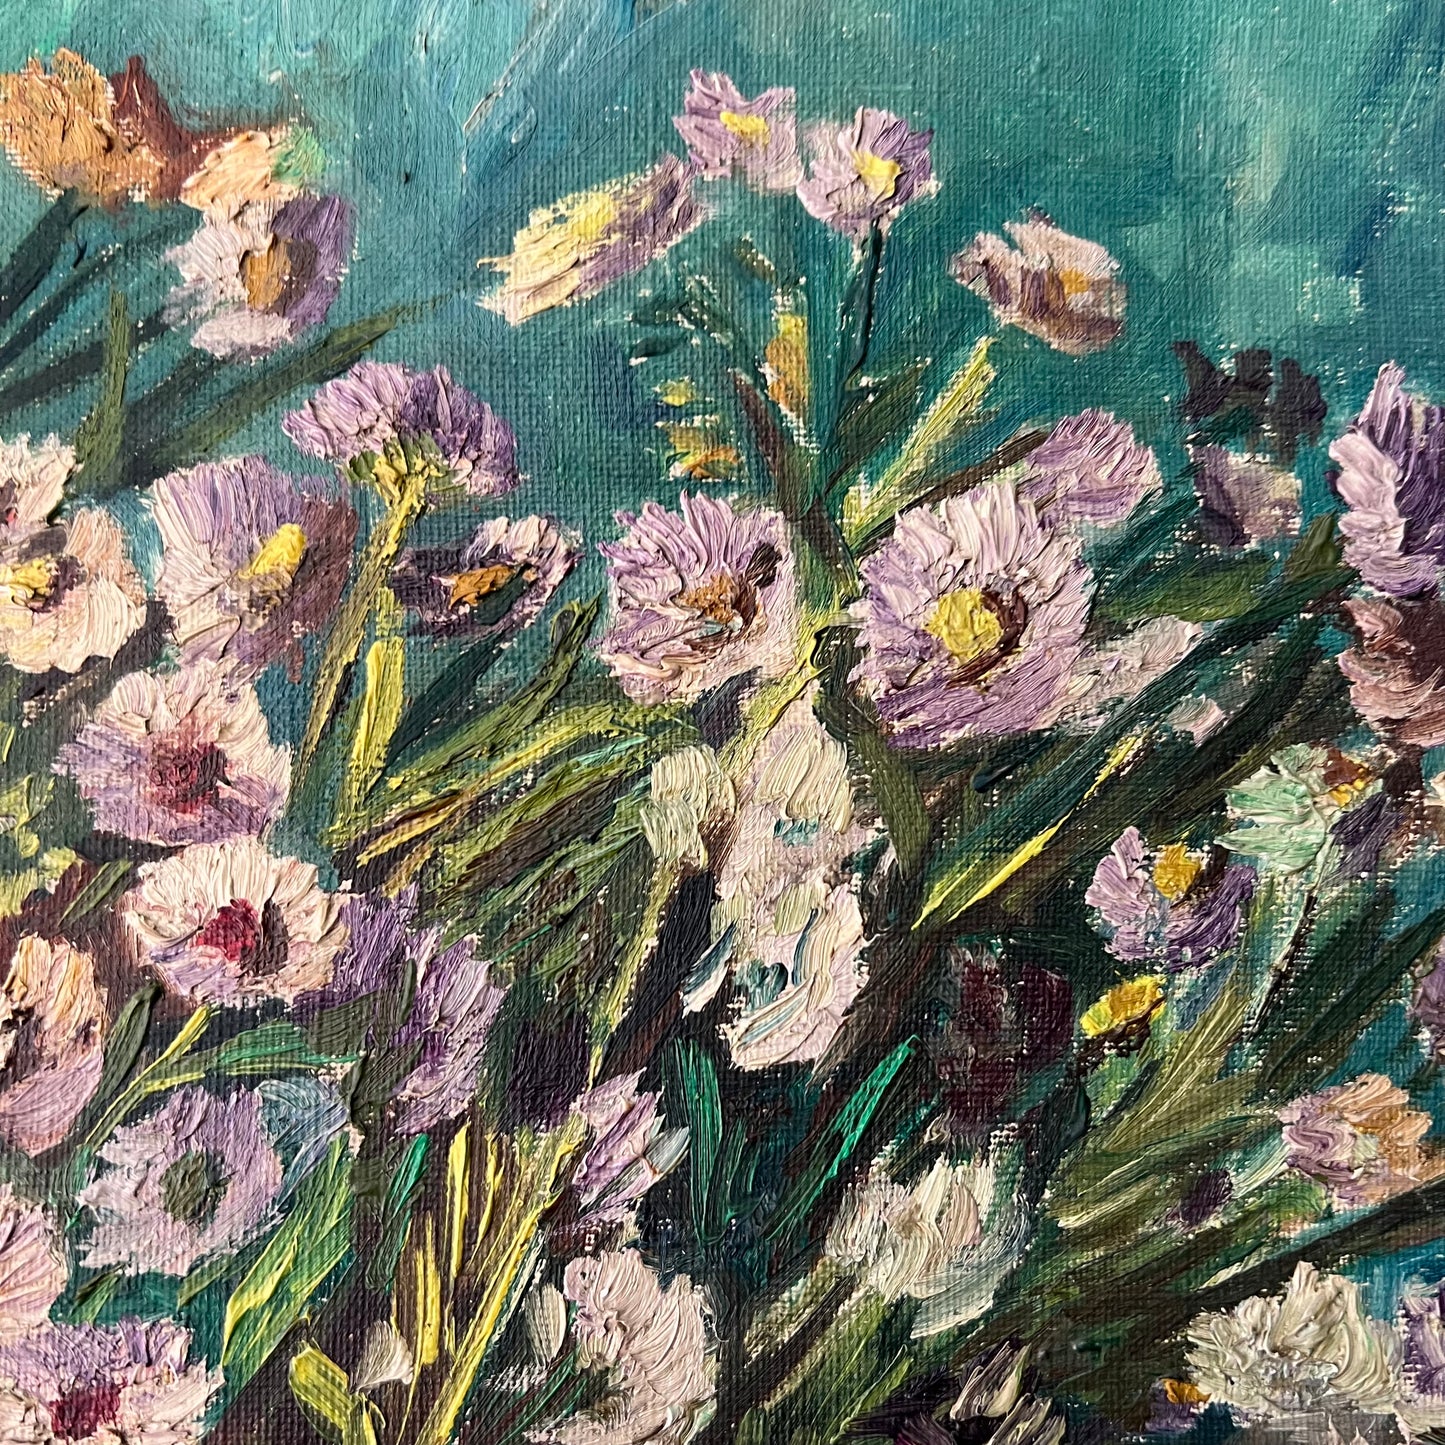 Vintage Oil Painting Daisies in Copper Kettle